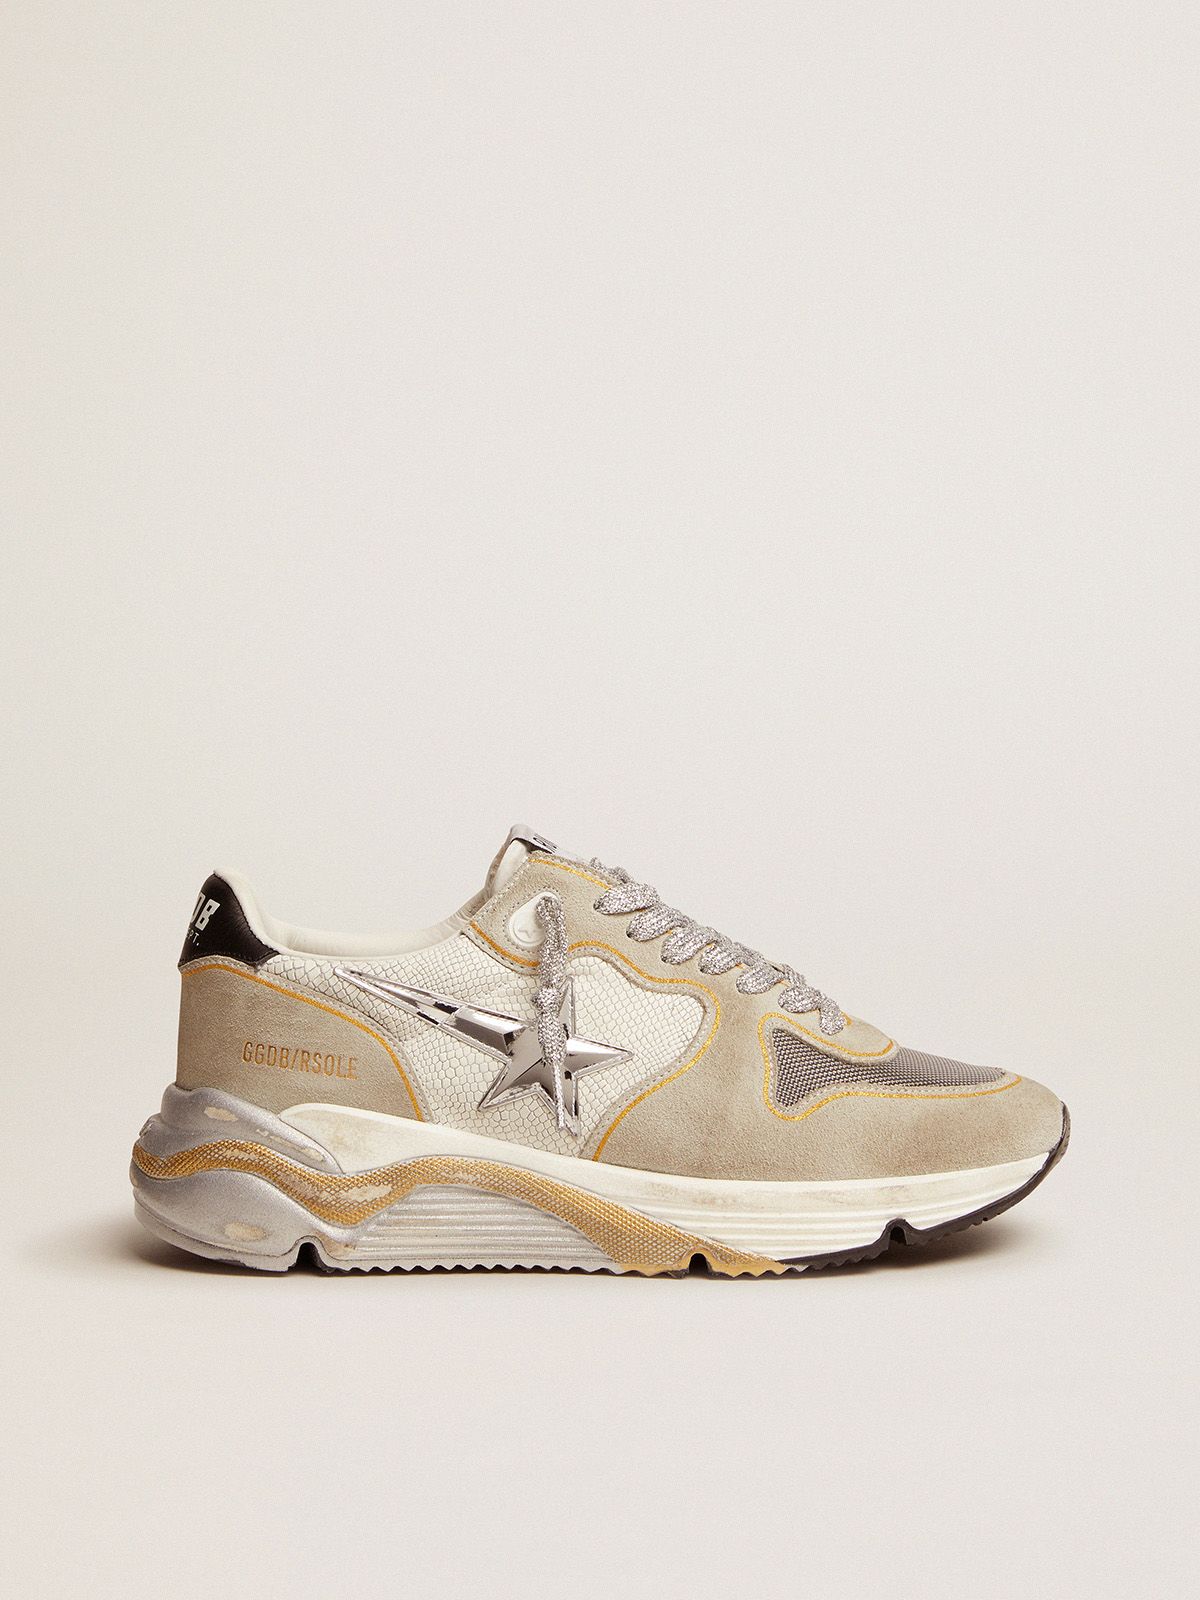 Running Sole LTD sneakers in white snake-print leather and suede with mesh insert | 